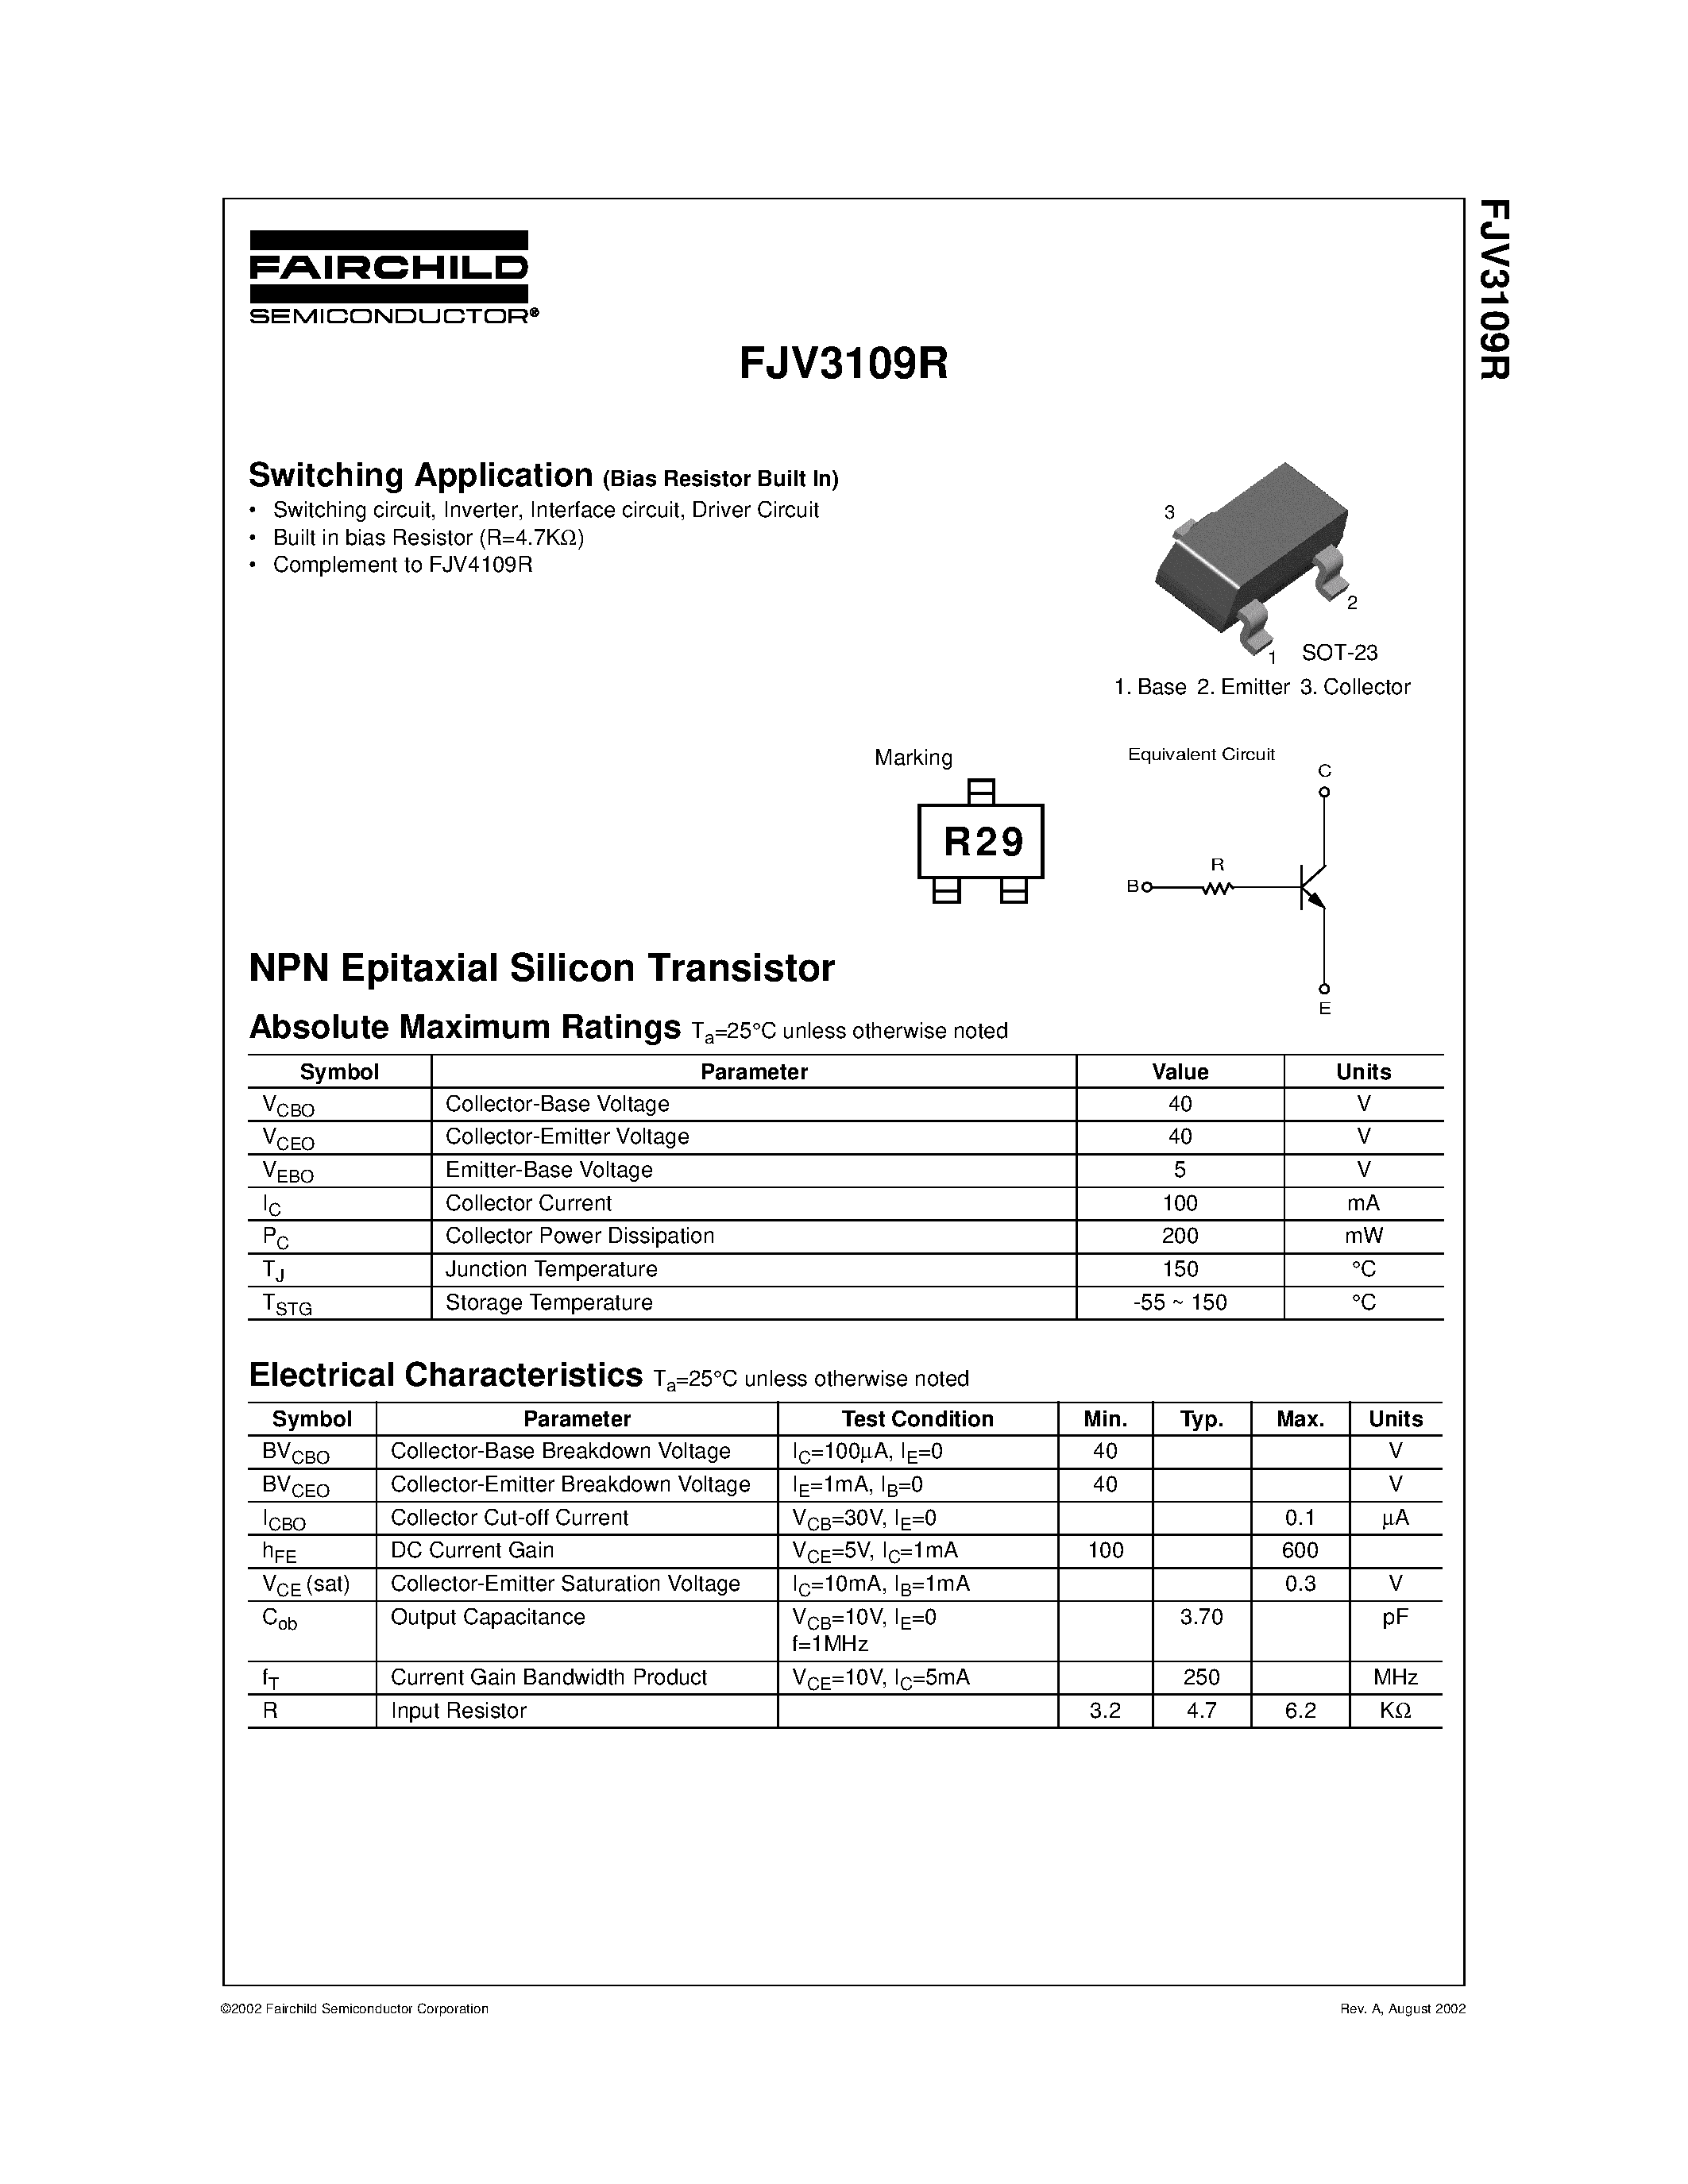 Datasheet FJV3109R - NPN Epitaxial Silicon Transistor page 1